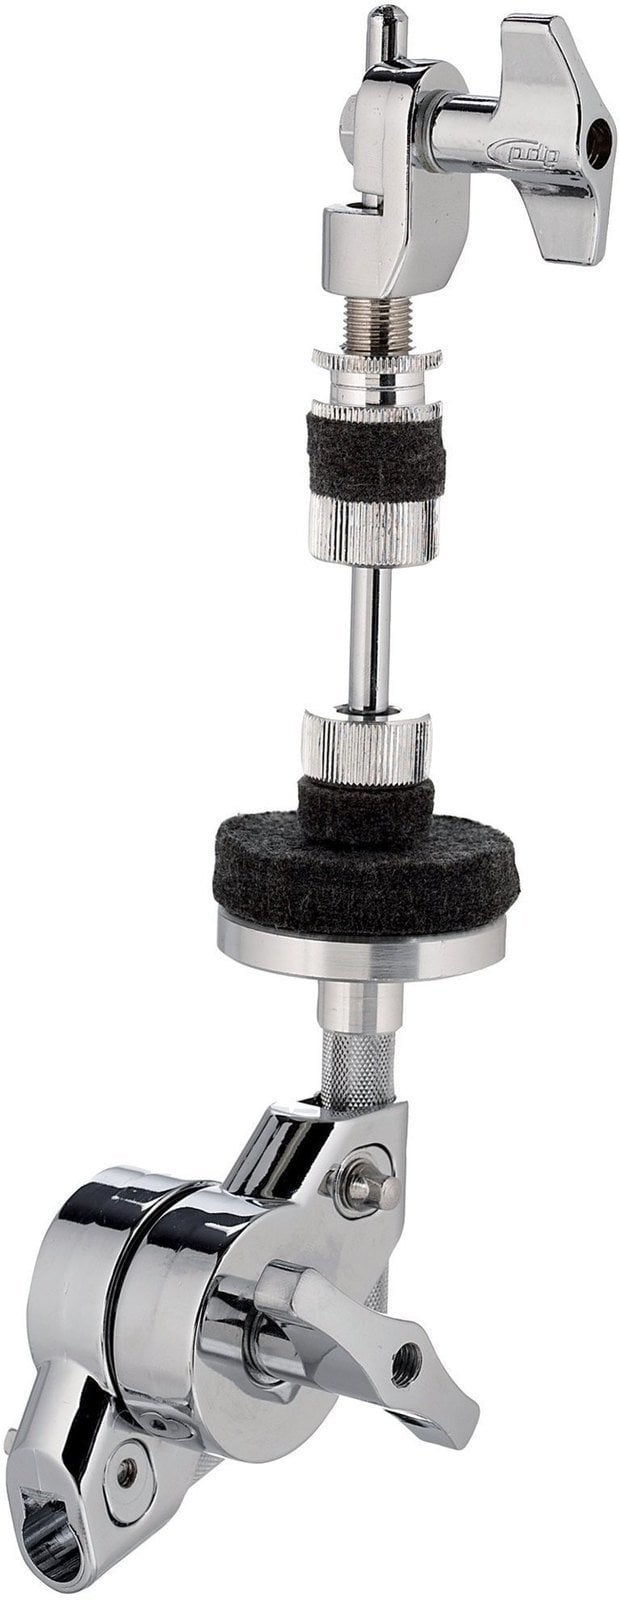 Hi-Hat Stand PDP by DW 804612 Hi-Hat Stand